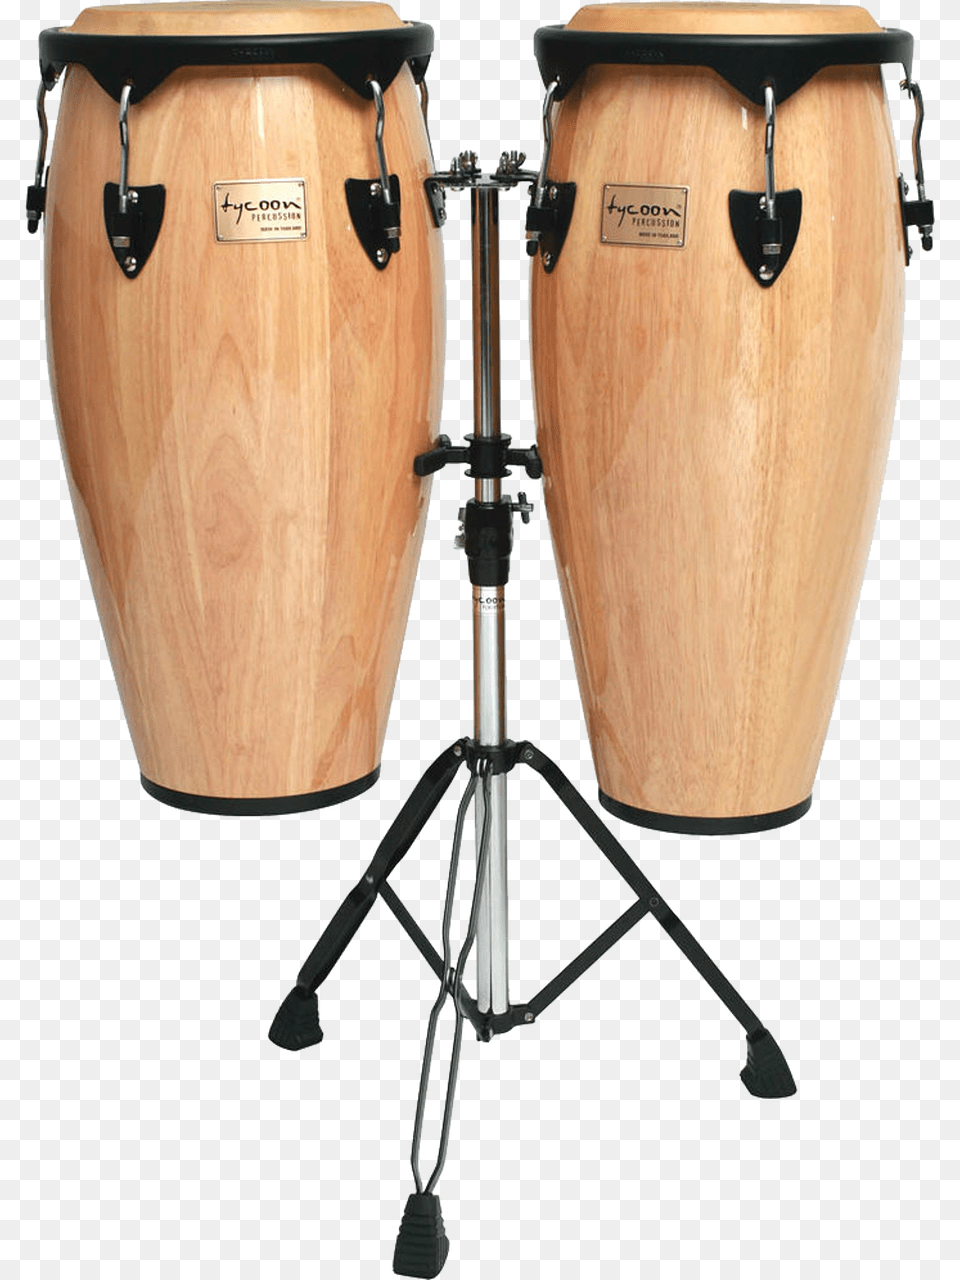 Tycoon Supremo Series Natural Congas, Drum, Musical Instrument, Percussion, Conga Free Png